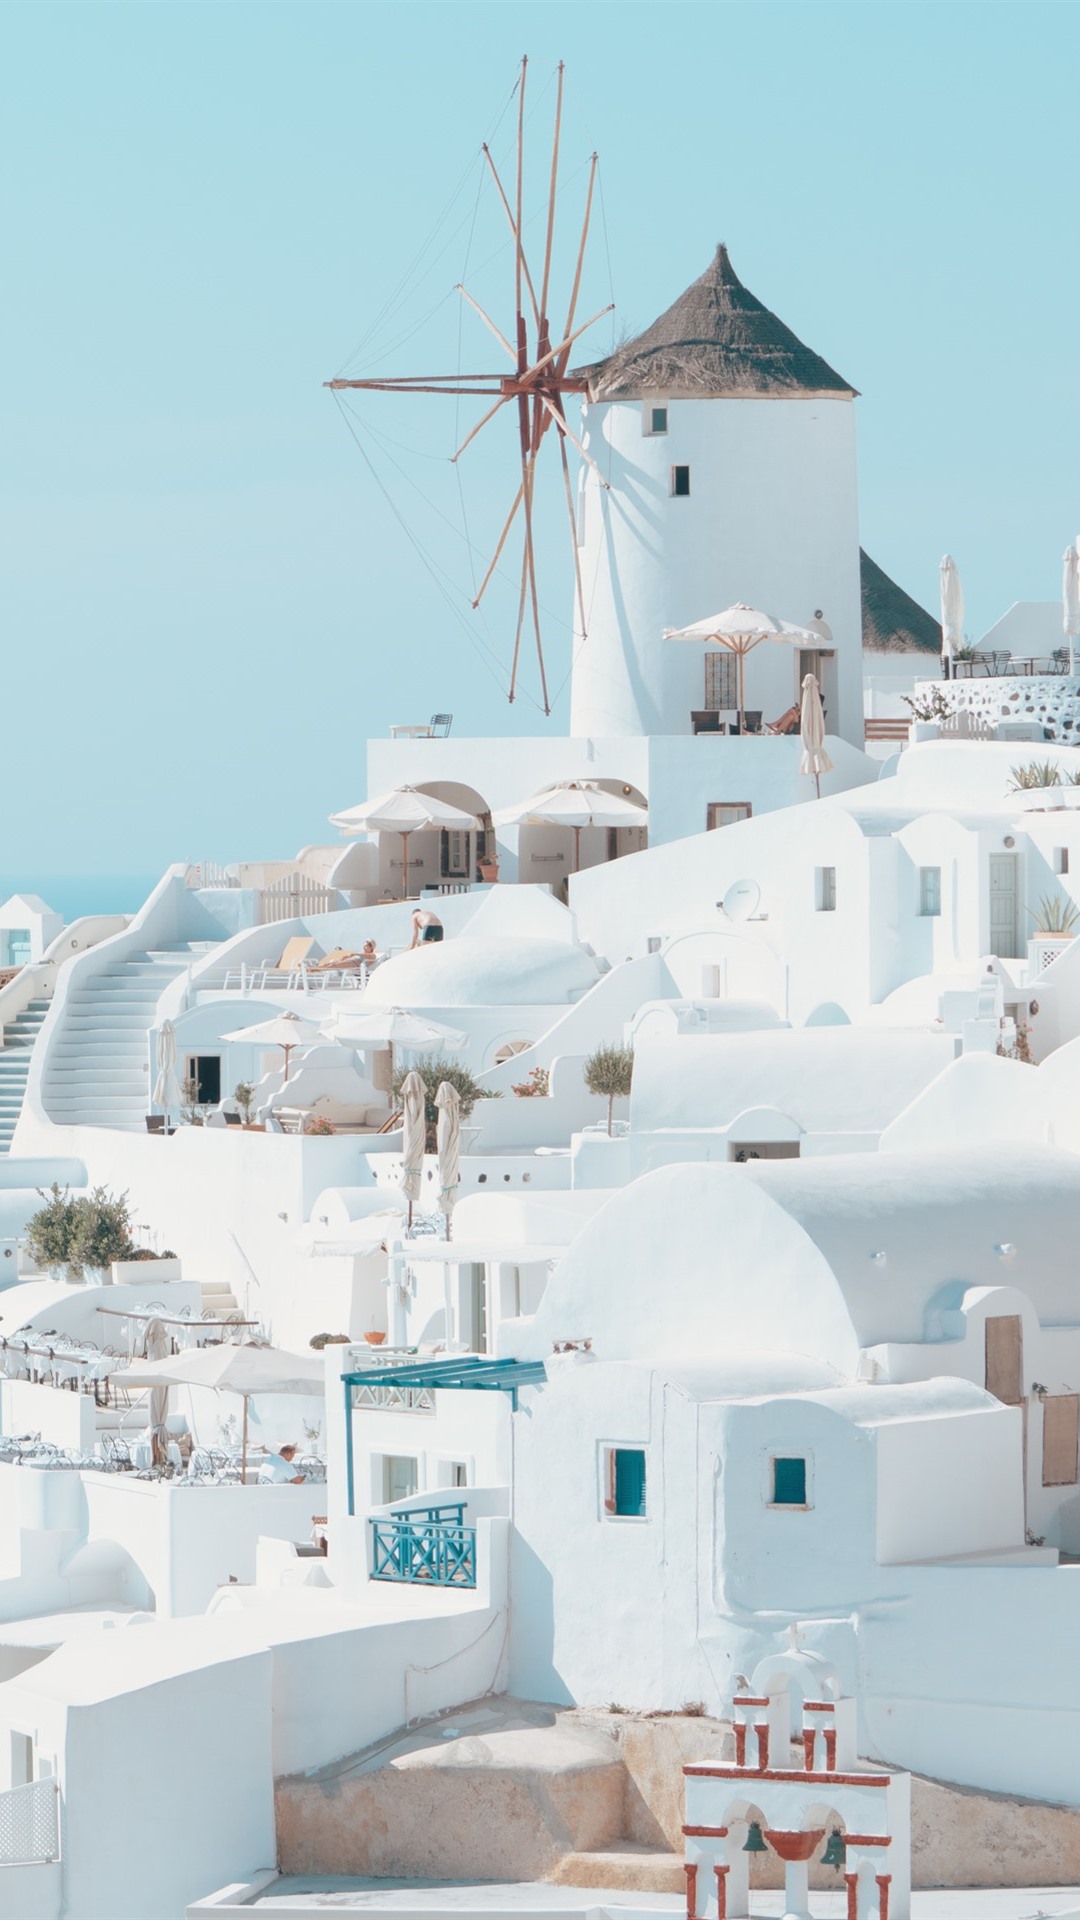 Free download Santorini Greece white style houses city 1080x1920 iPhone 876 [1080x1920] for your Desktop, Mobile & Tablet. Explore Santorini iPhone Wallpaper. Santorini iPhone Wallpaper, Santorini Wallpaper, Santorini Wallpaper Murals